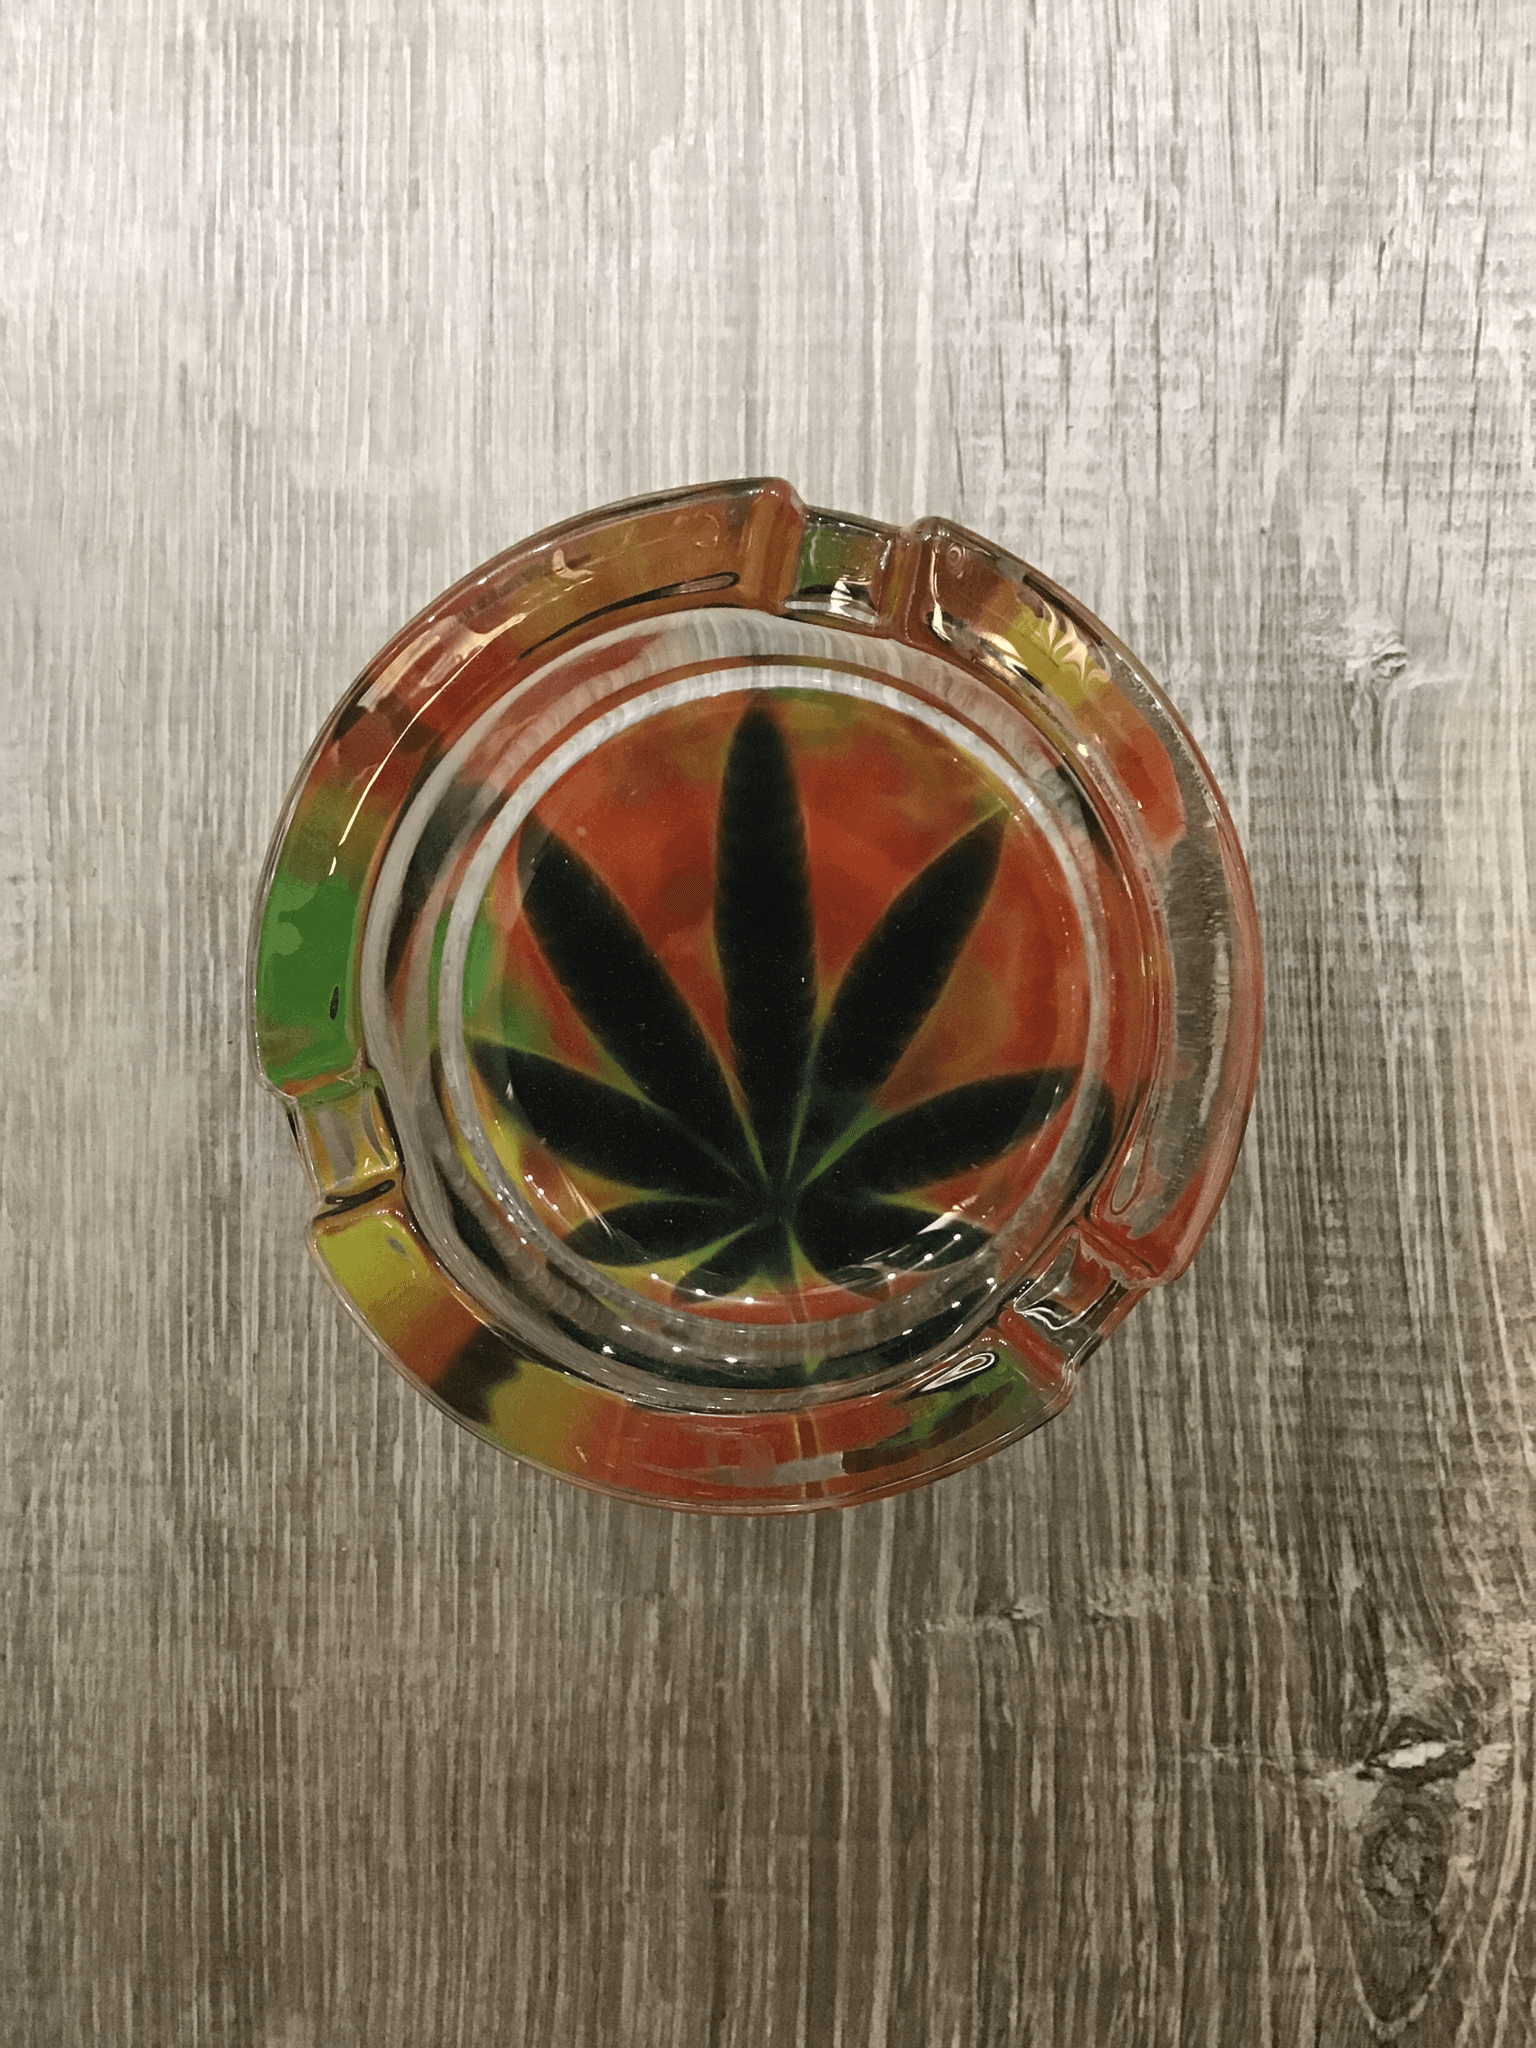 Rasta Tie-Dye Clouds Canna Leaf/ Heavy Glass yoga smokes yoga studio, delivery, delivery near me, yoga smokes smoke shop, find smoke shop, head shop near me, yoga studio, headshop, head shop, local smoke shop, psl, psl smoke shop, smoke shop, smokeshop, yoga, yoga studio, dispensary, local dispensary, smokeshop near me, port saint lucie, florida, port st lucie, lounge, life, highlife, love, stoned, highsociety. Yoga Smokes